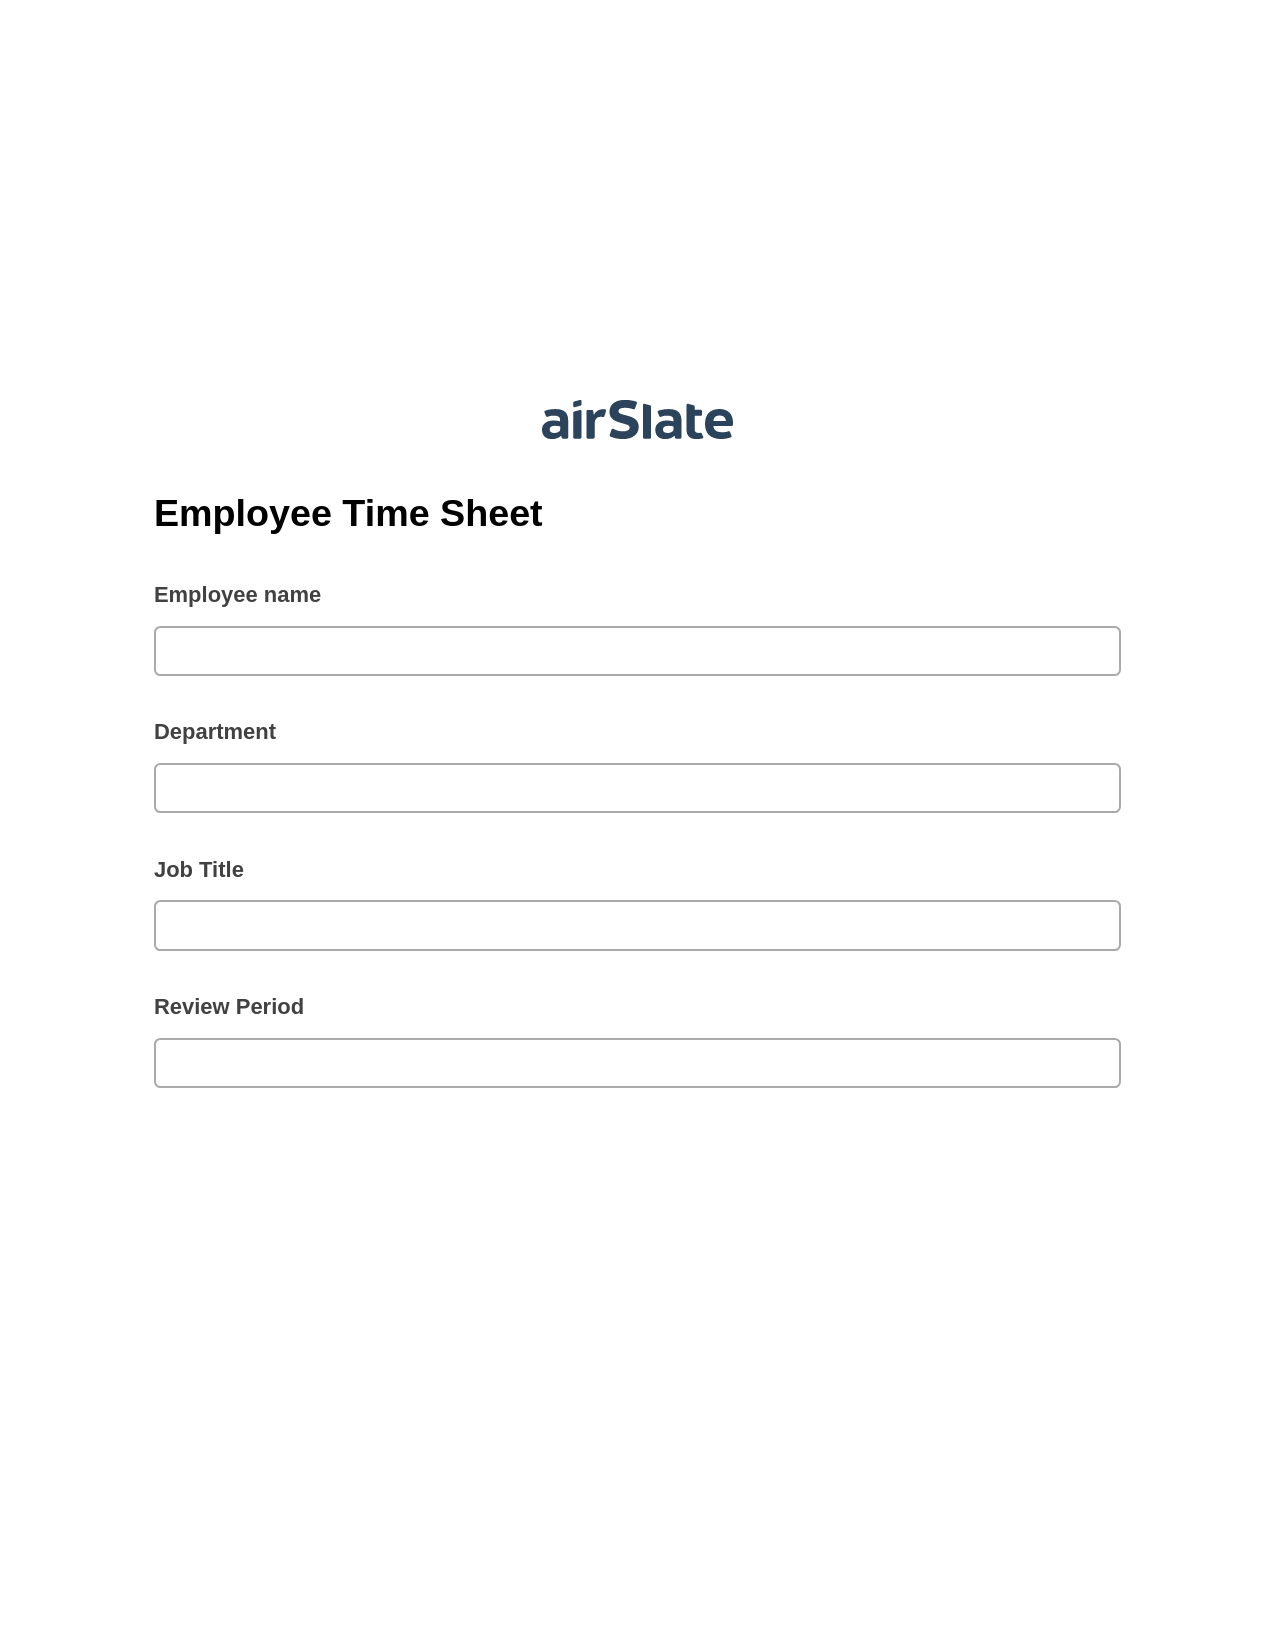 Multirole Employee Time Sheet Pre-fill from another Slate Bot, Create Salesforce Records Bot, Export to NetSuite Bot